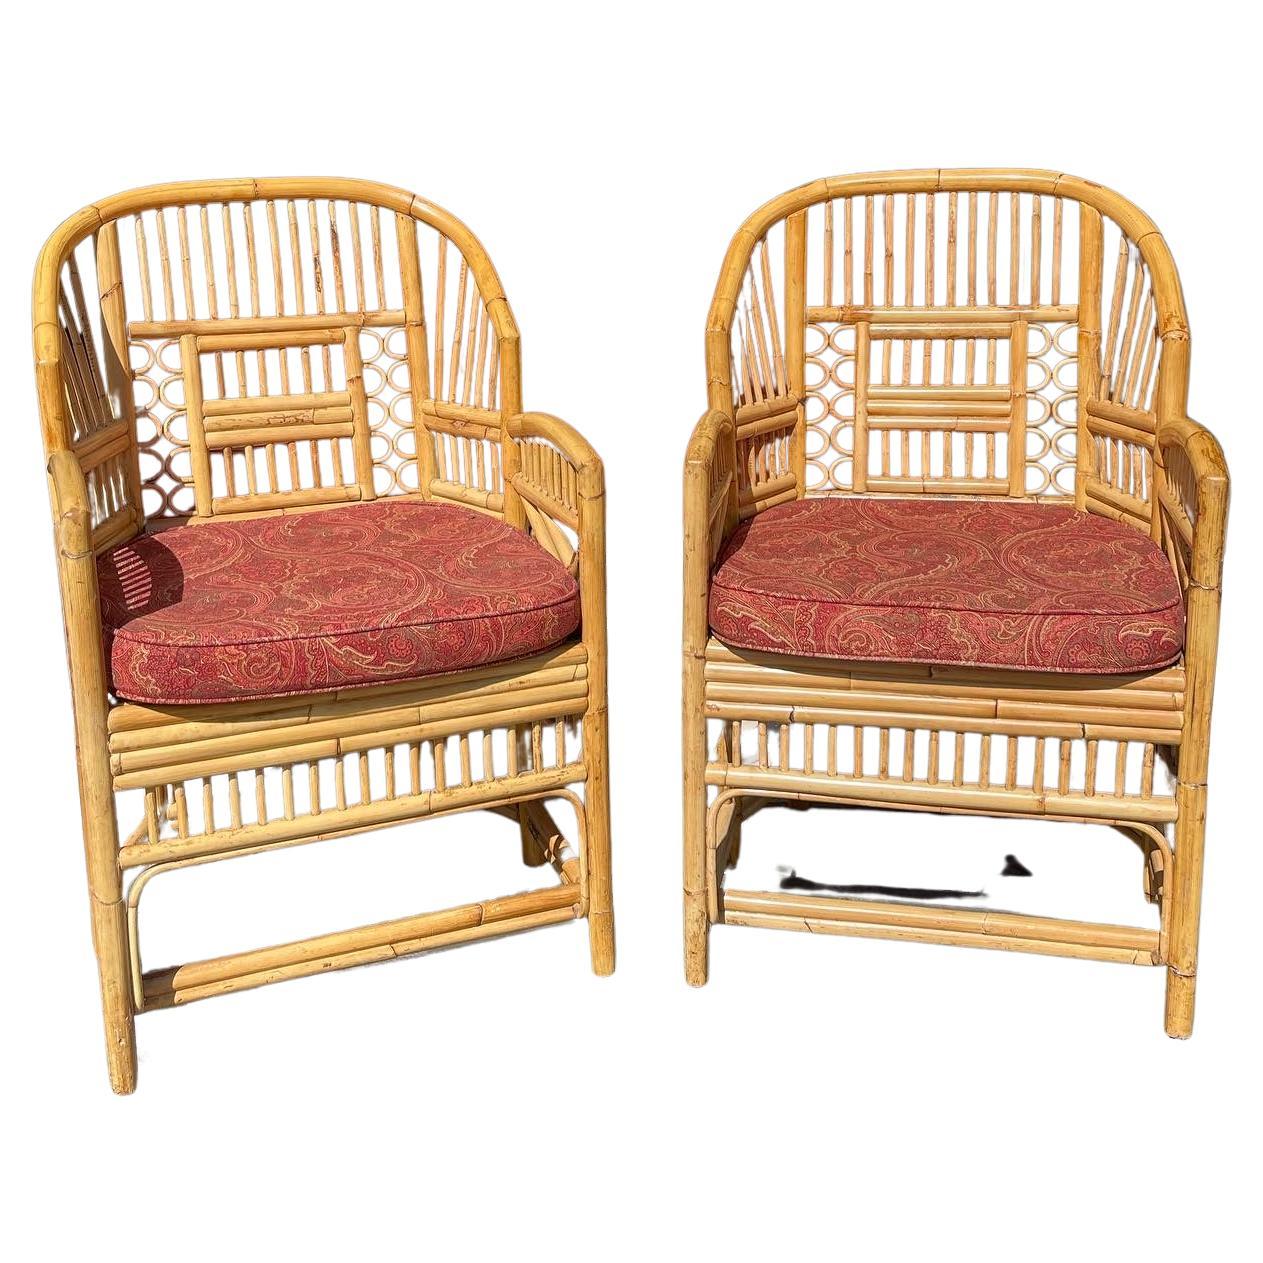 Pair of Brighton Pavilion Style Bamboo and Cane 20th Century Chairs